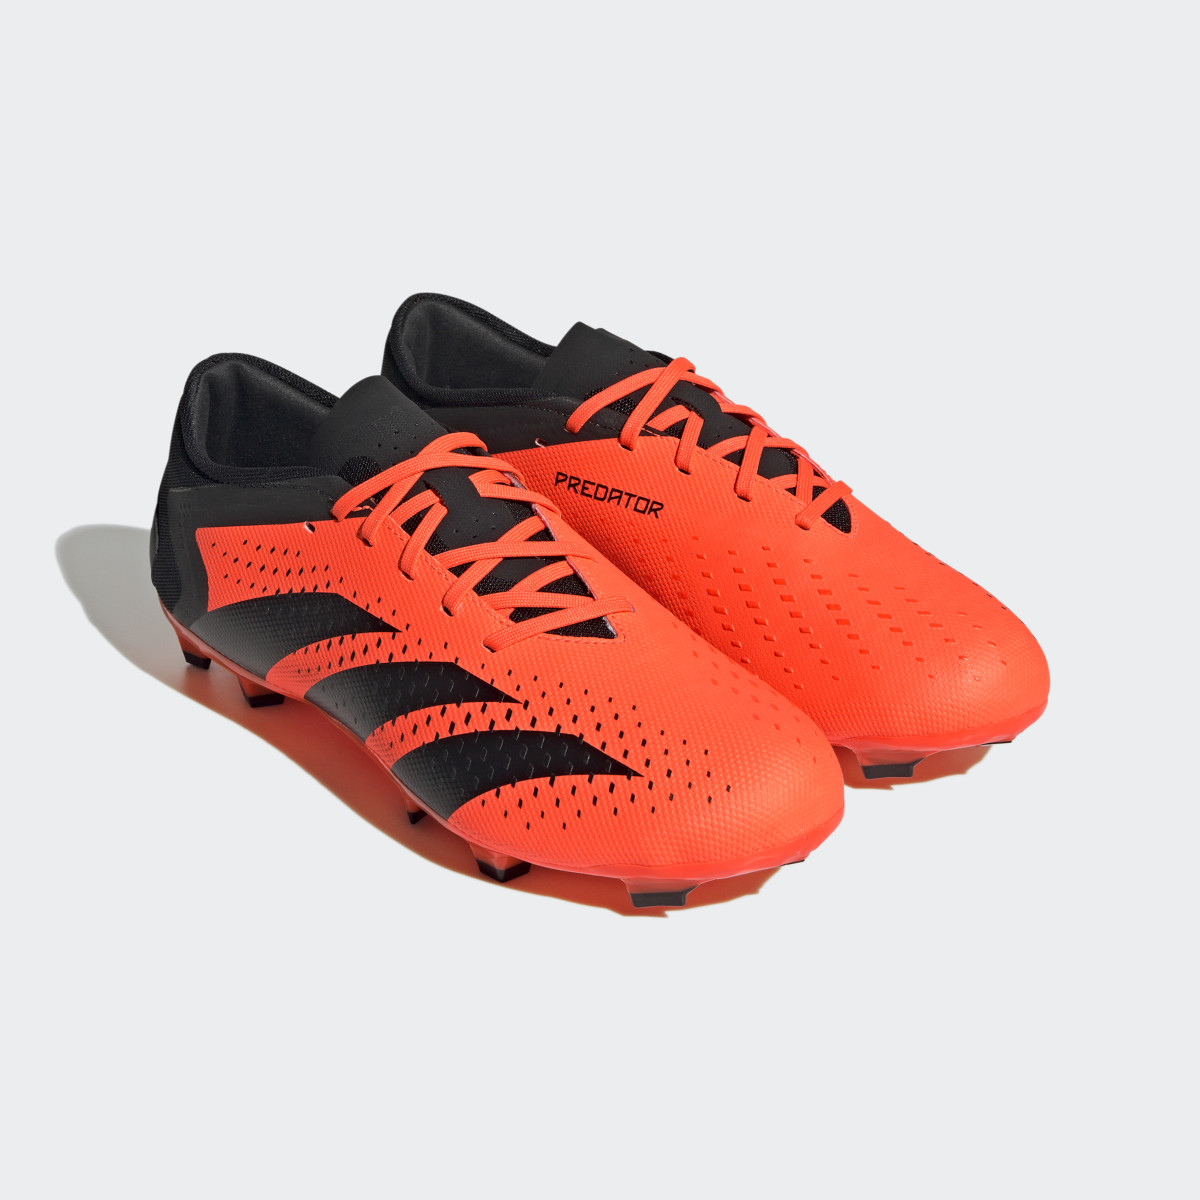 Adidas Predator Accuracy.3 Low Firm Ground Boots. 5